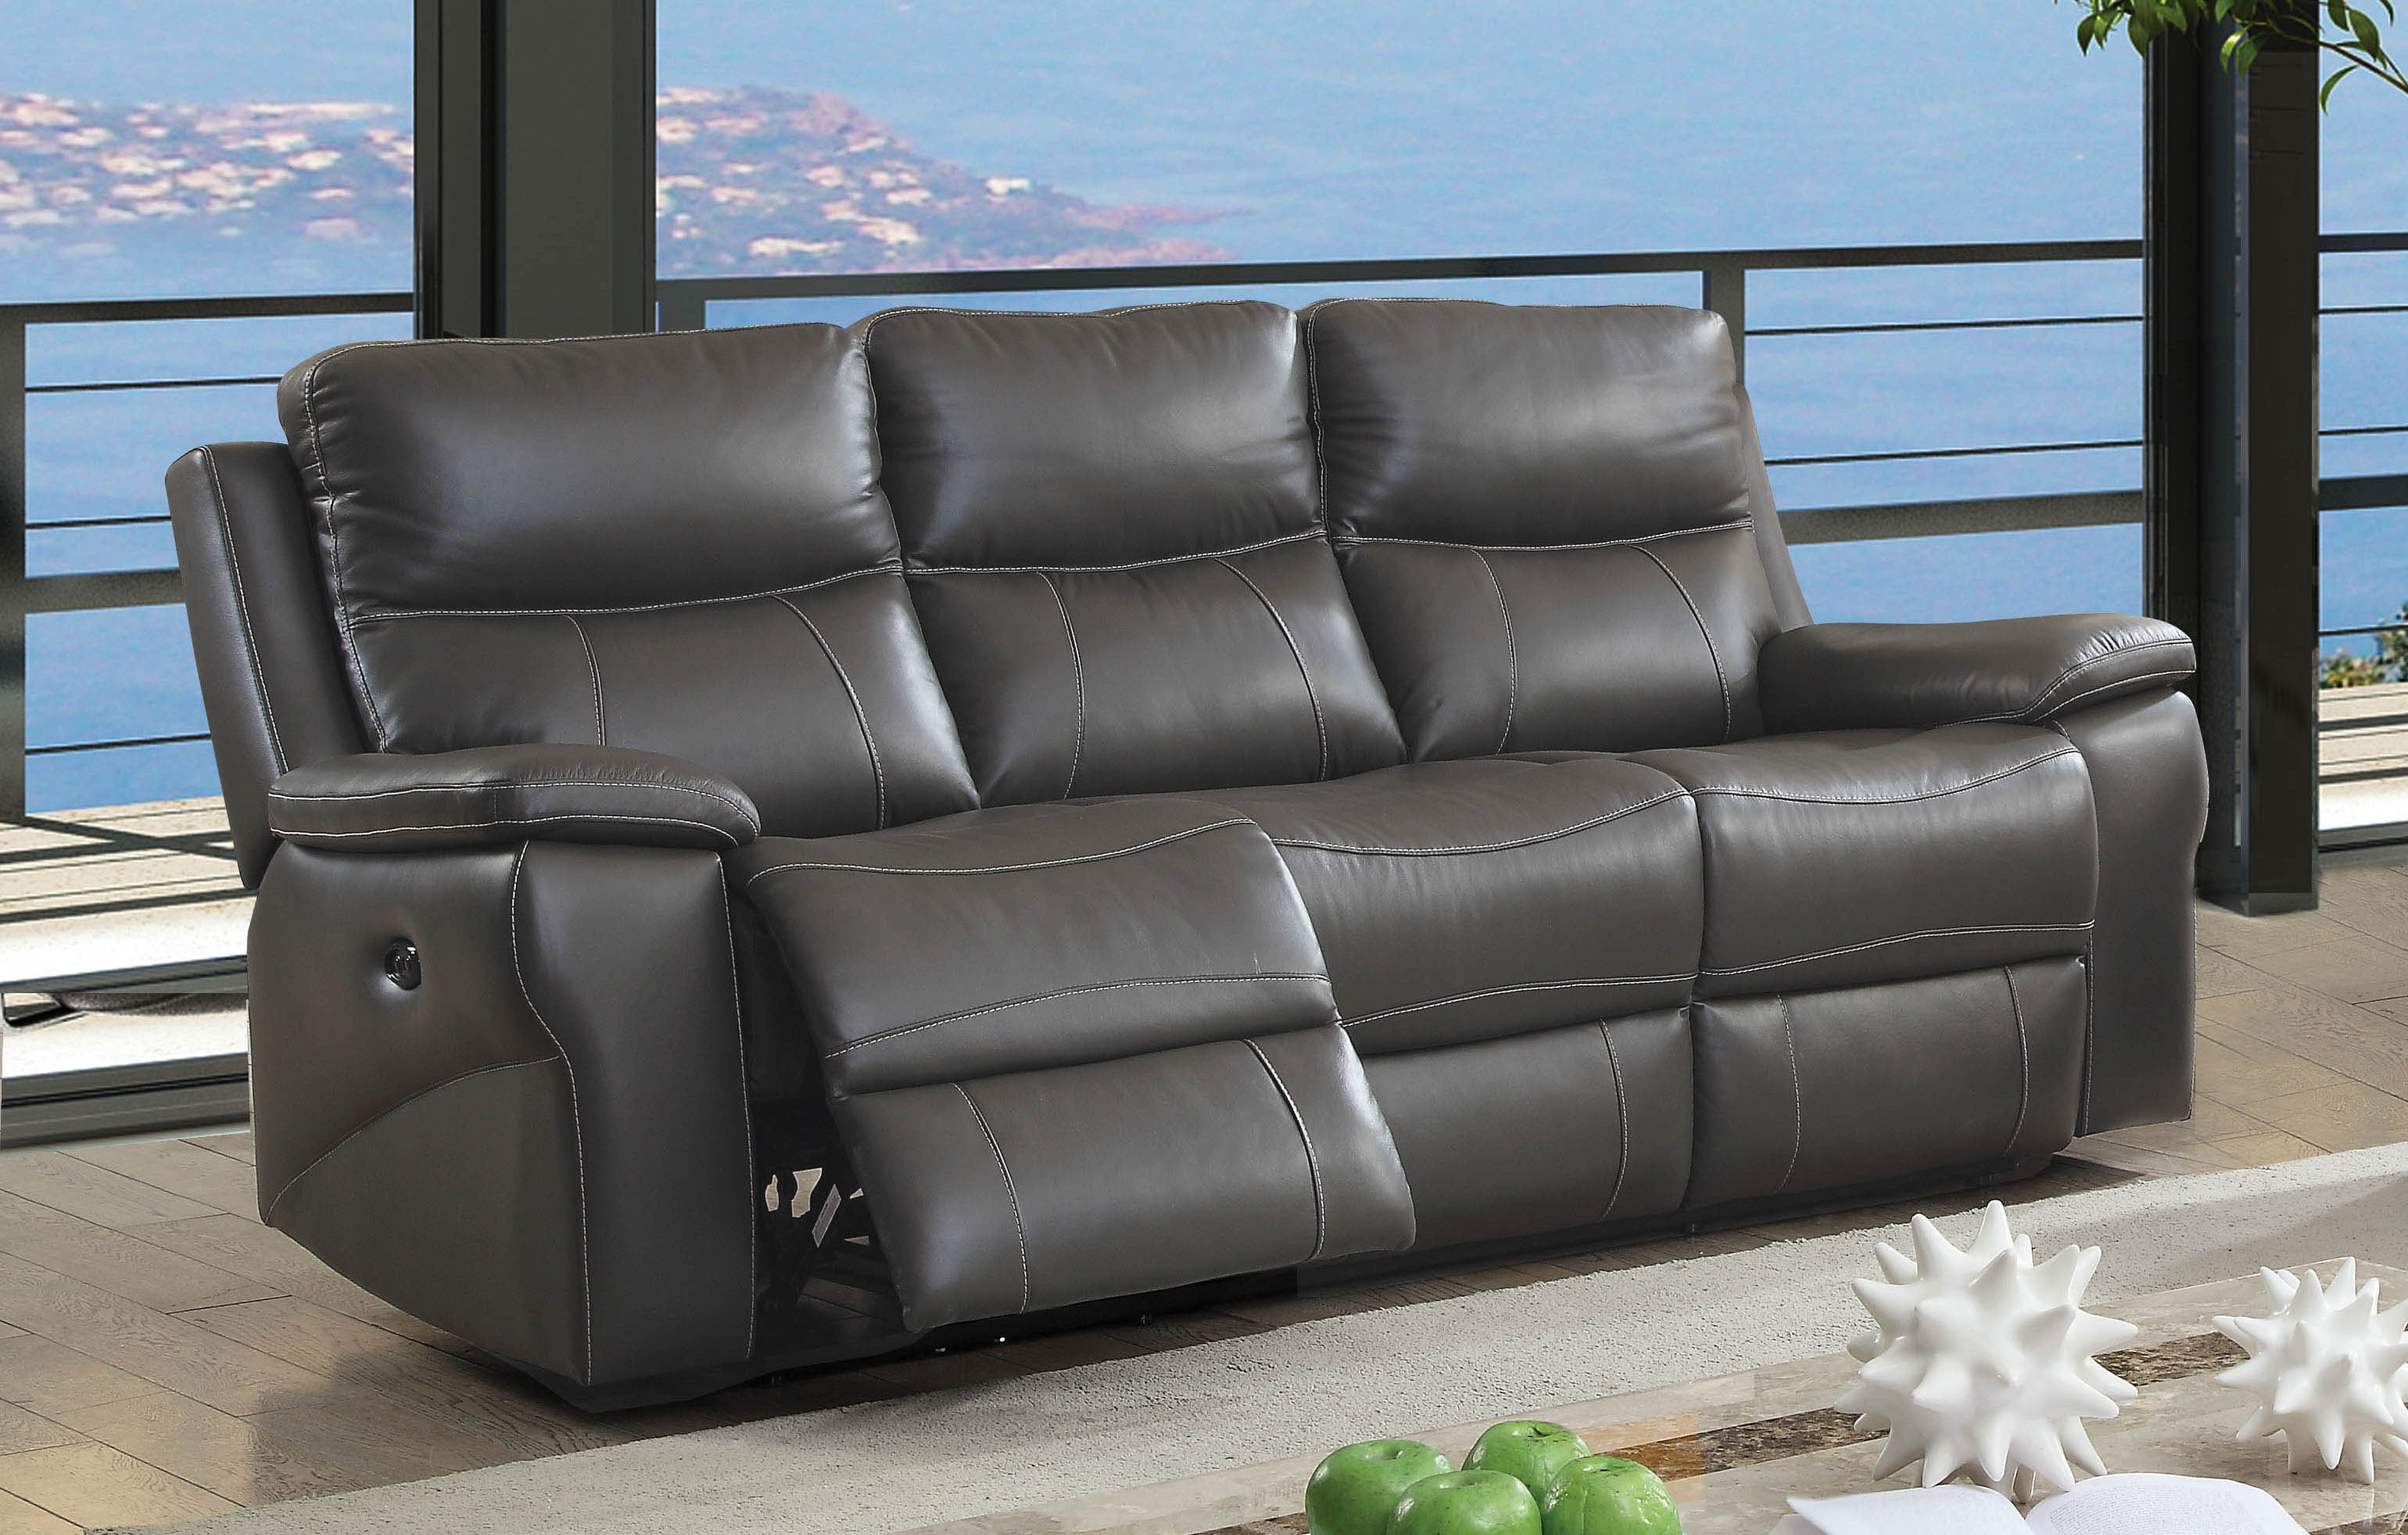 Explore 77+ Awe-inspiring tomlin leather power reclining sofa Trend Of The Year